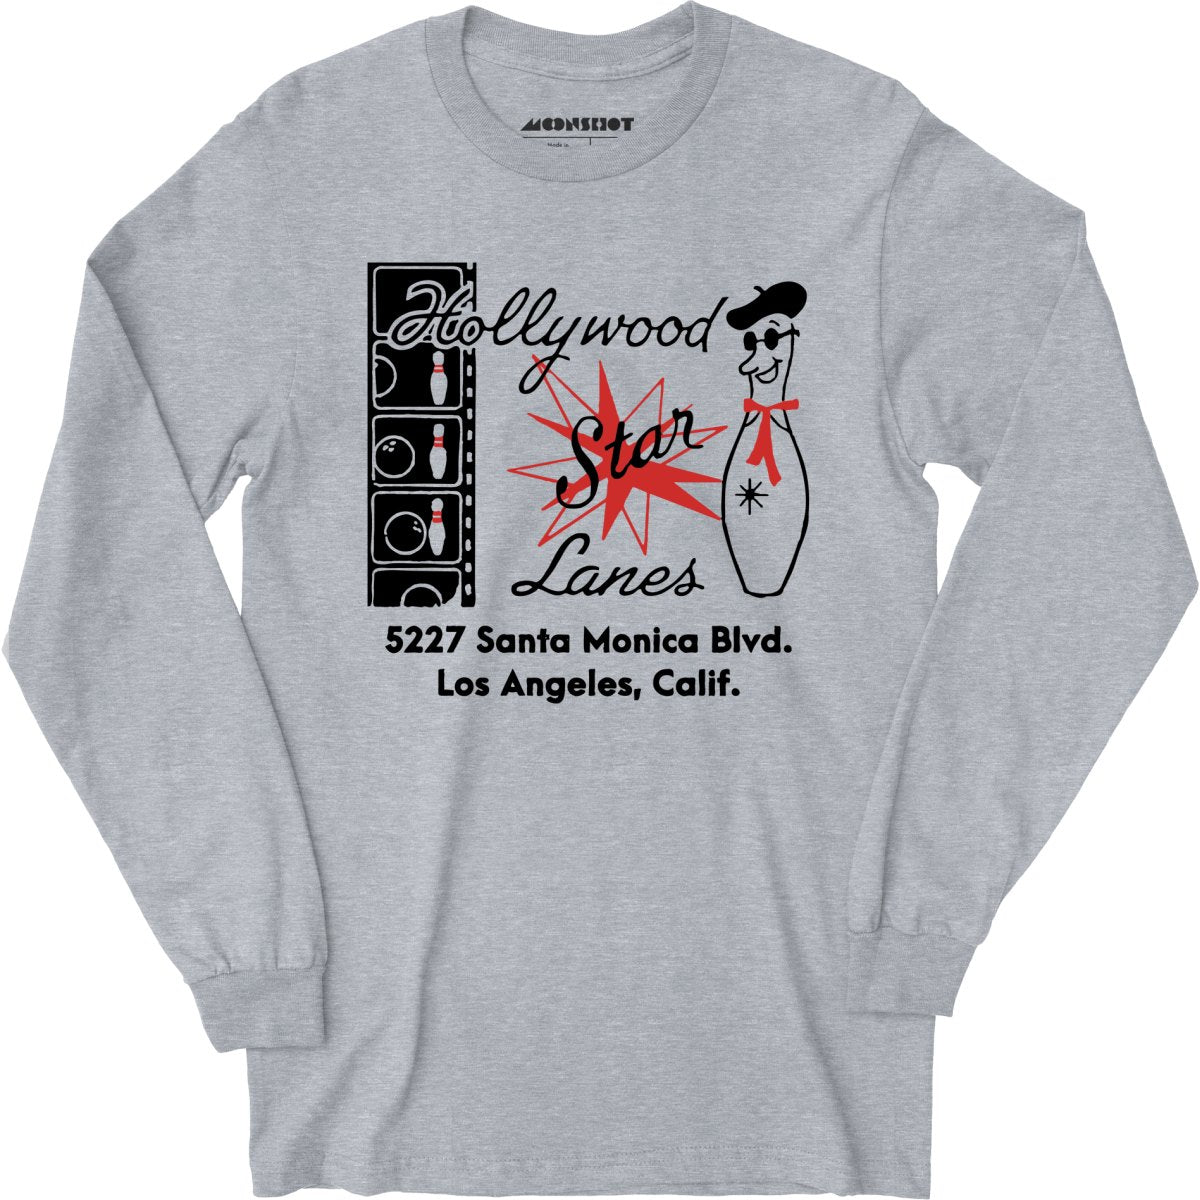 Hollywood Star Lanes - Los Angeles, CA - Vintage Bowling Alley - Long Sleeve T-Shirt